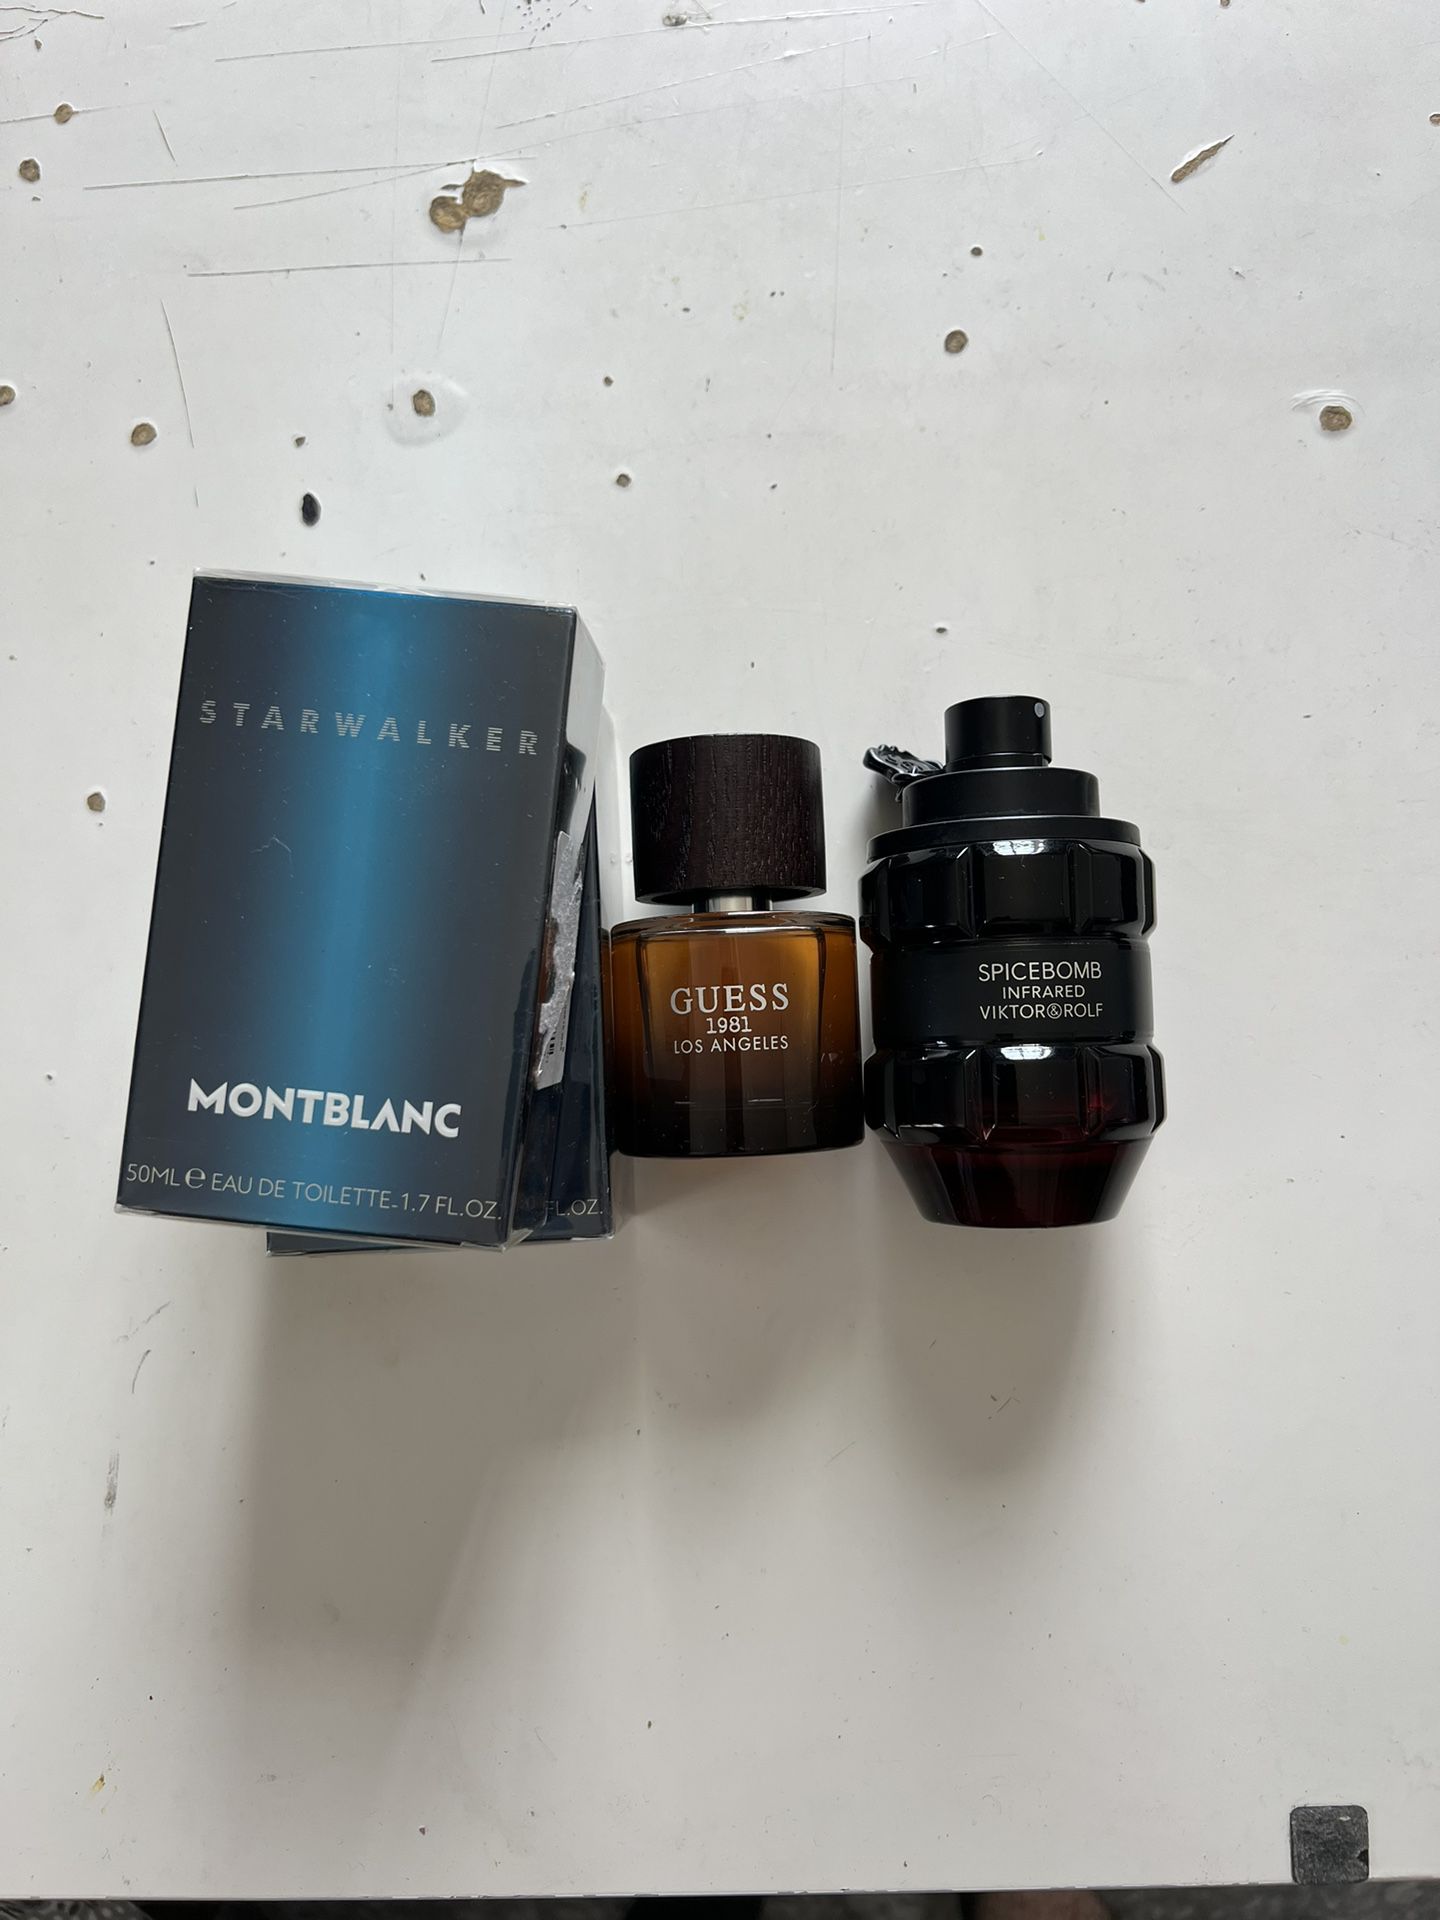 Cologne SpiceBomb/Montblanc/Guess